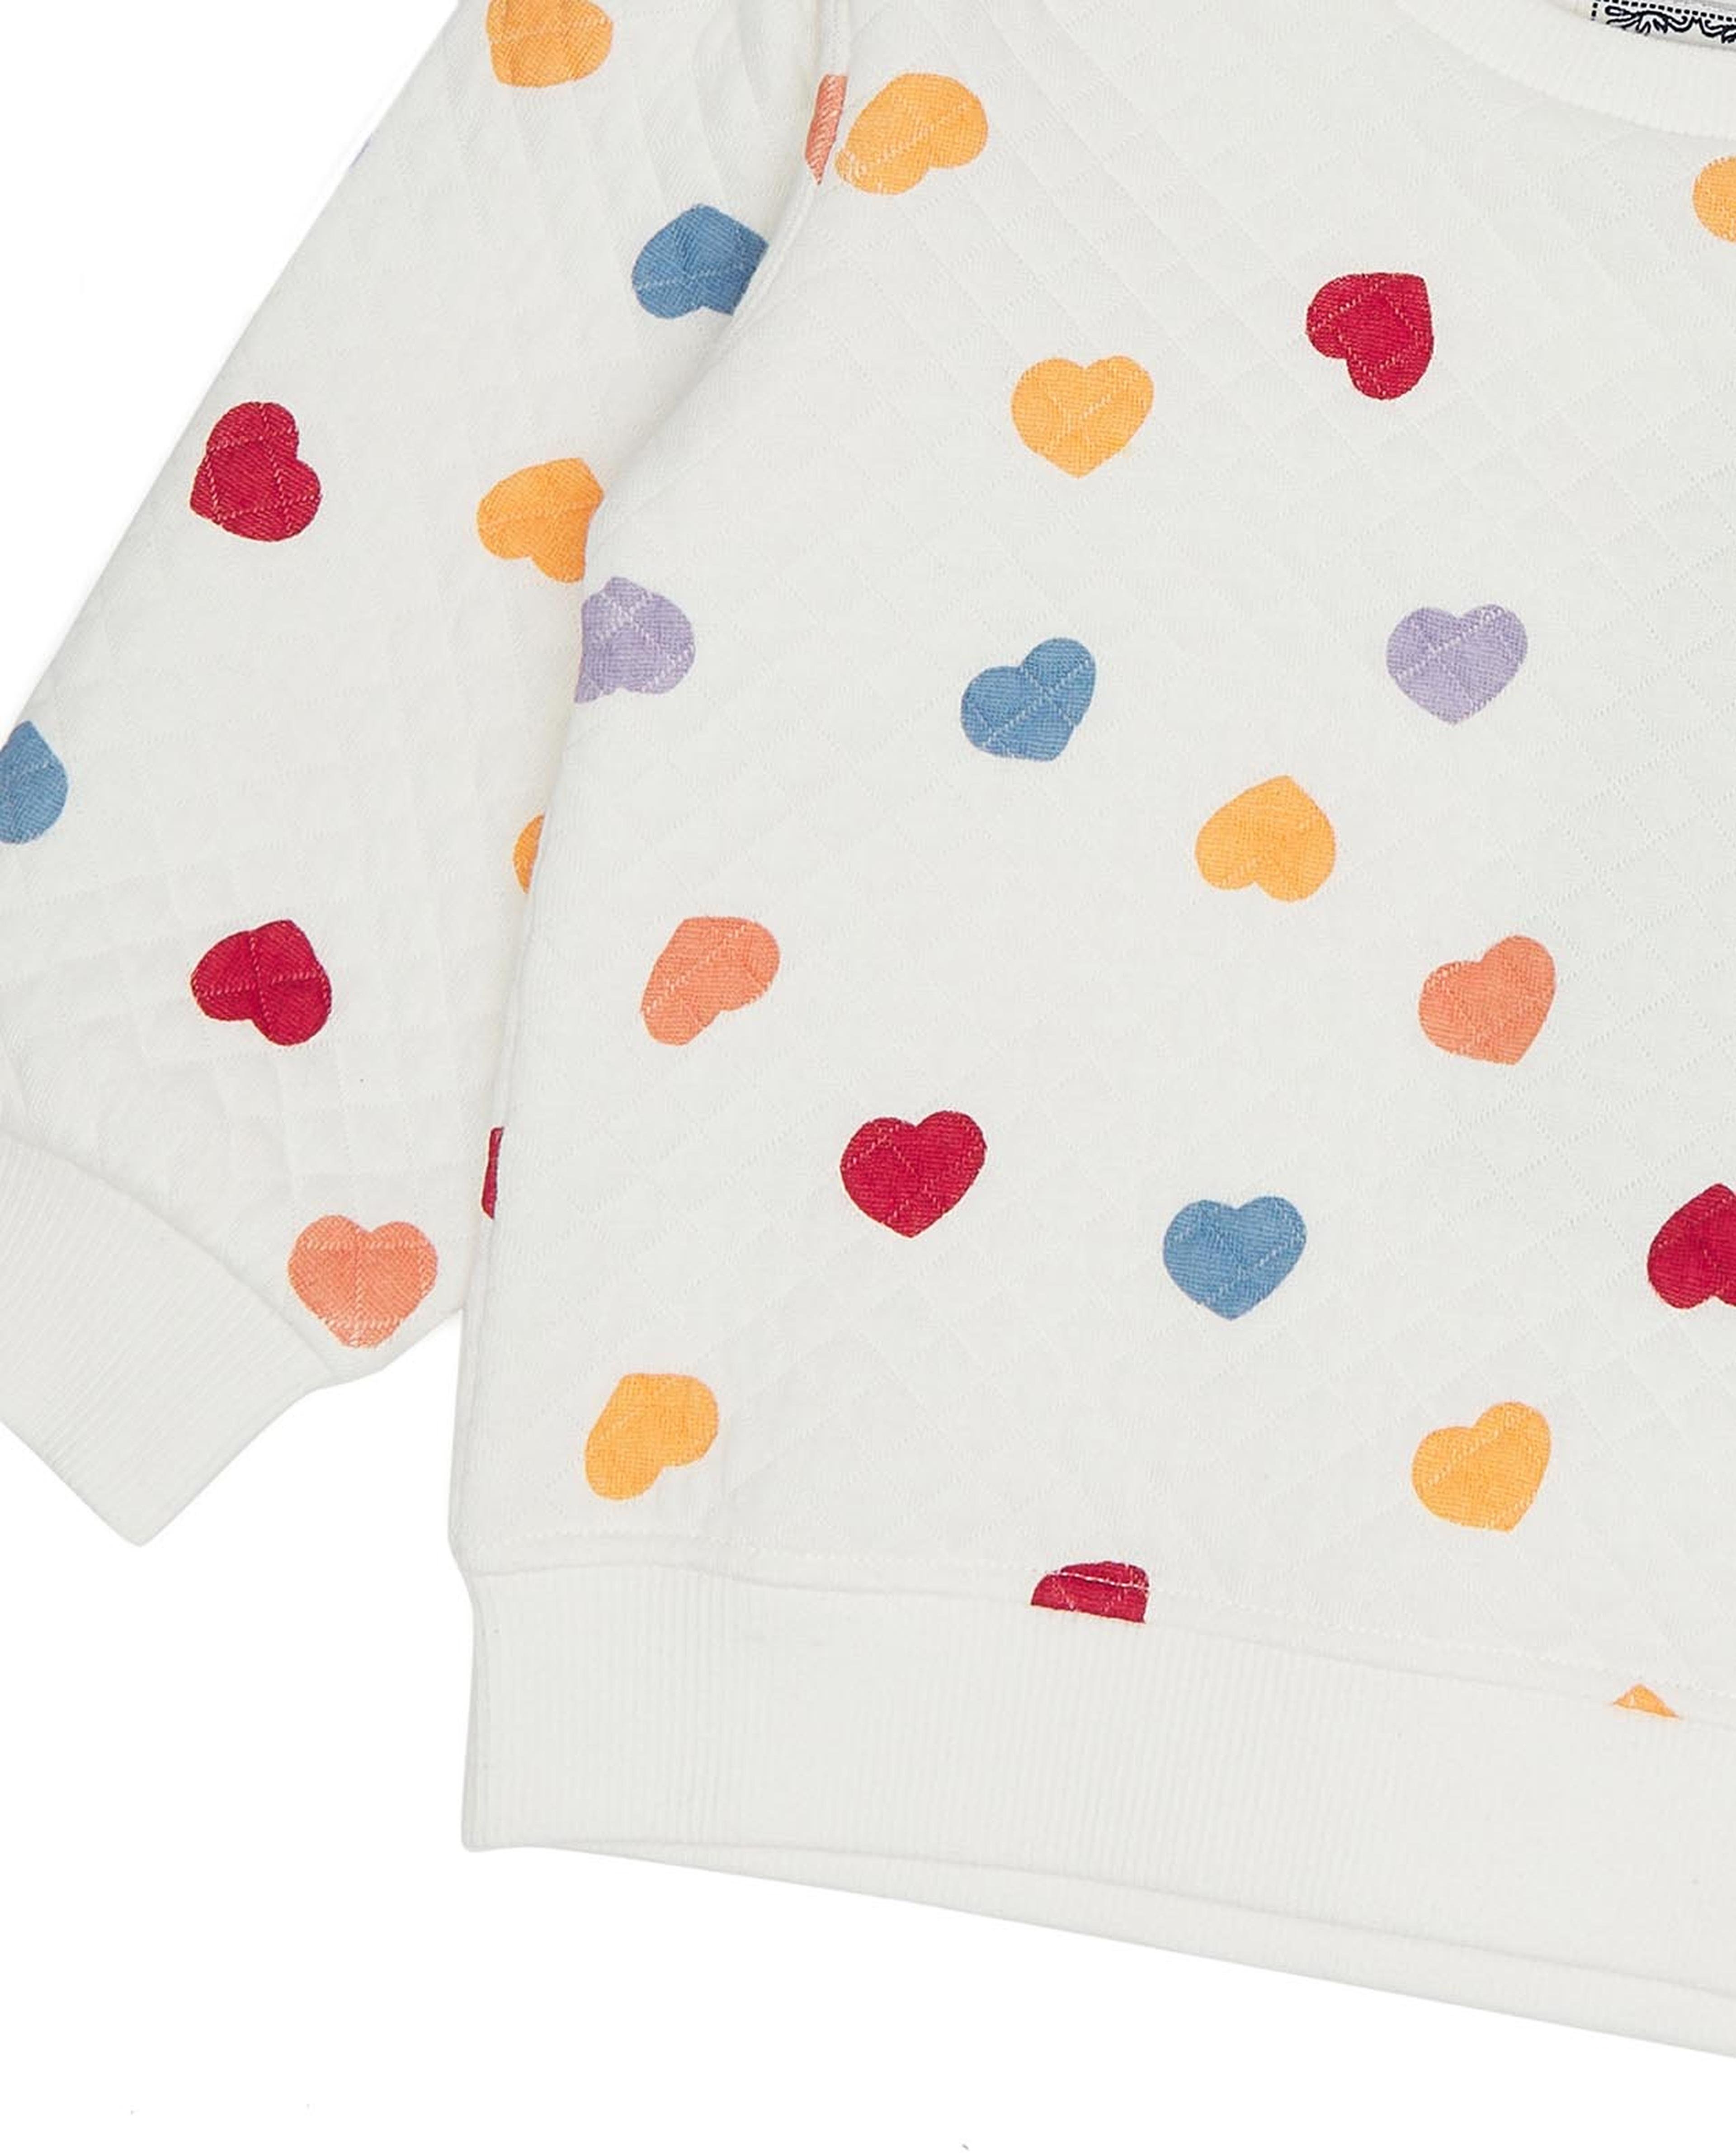 Heart patterned Sweatshirt with Crew Neck and Long Sleeves